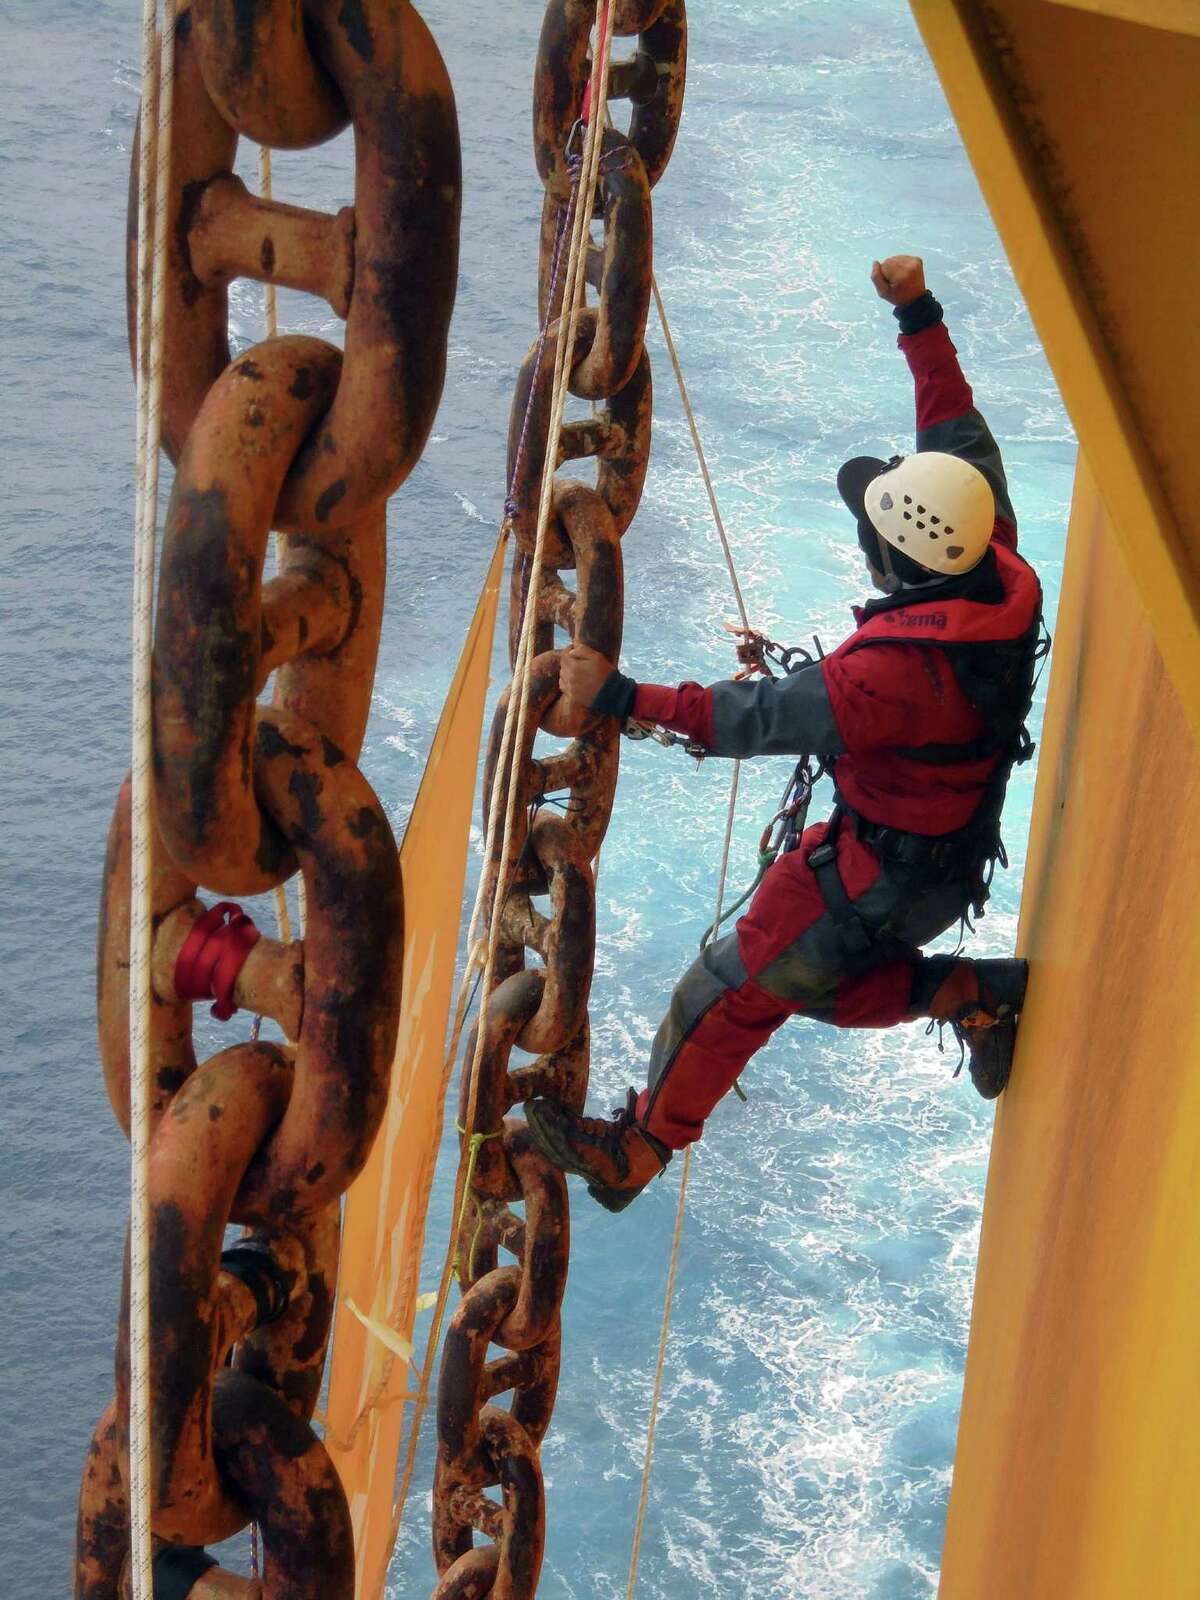 Greenpeace activists rig ropes and set up camp underneath the main deck of Shell's Arctic-bound Polar Pioneer oil rig in the Pacific Ocean last week. A federal judge granted a temporary restraining order blocking Greenpeace from similar protests.